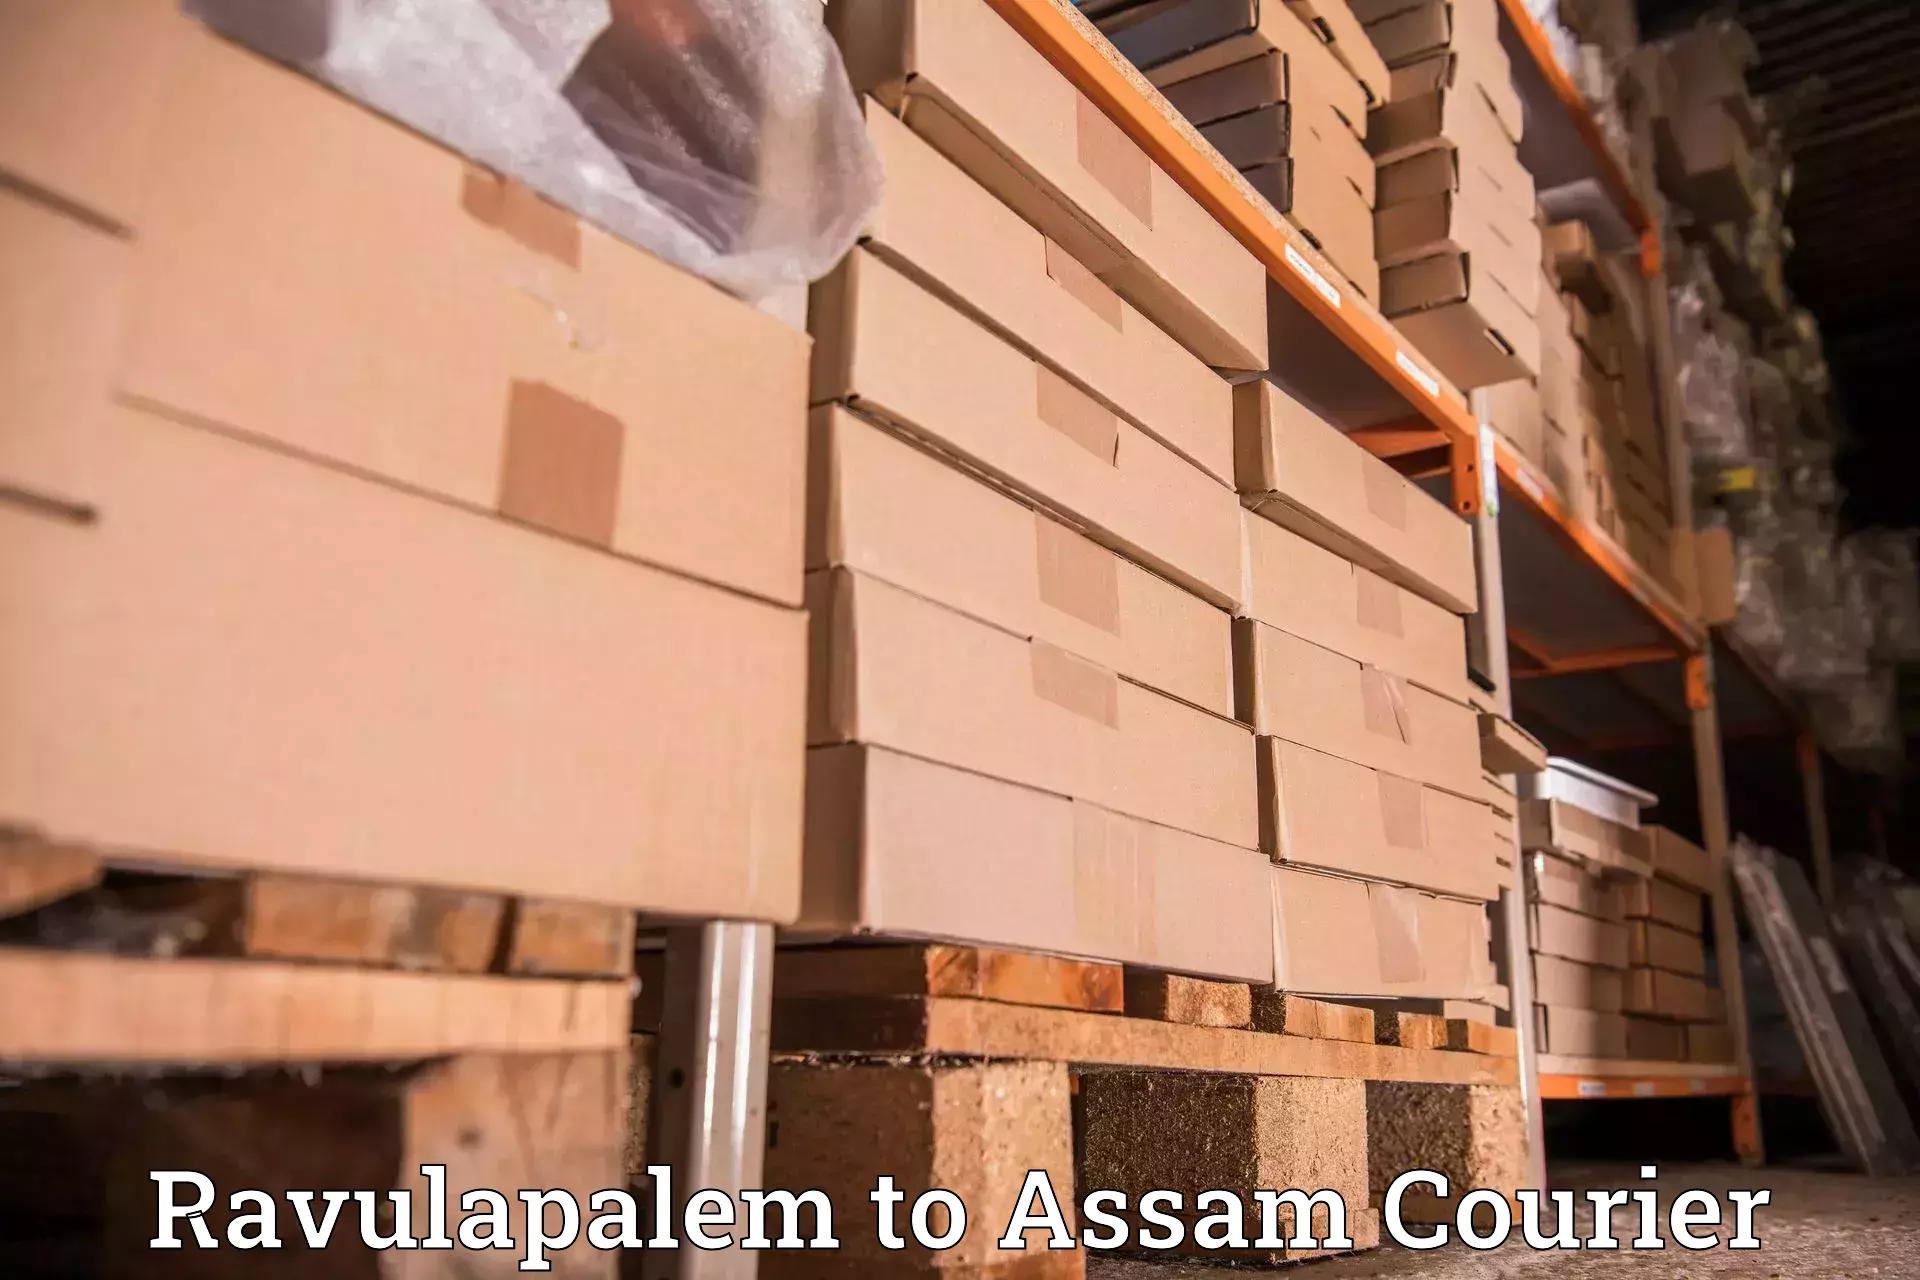 Personal parcel delivery in Ravulapalem to Assam